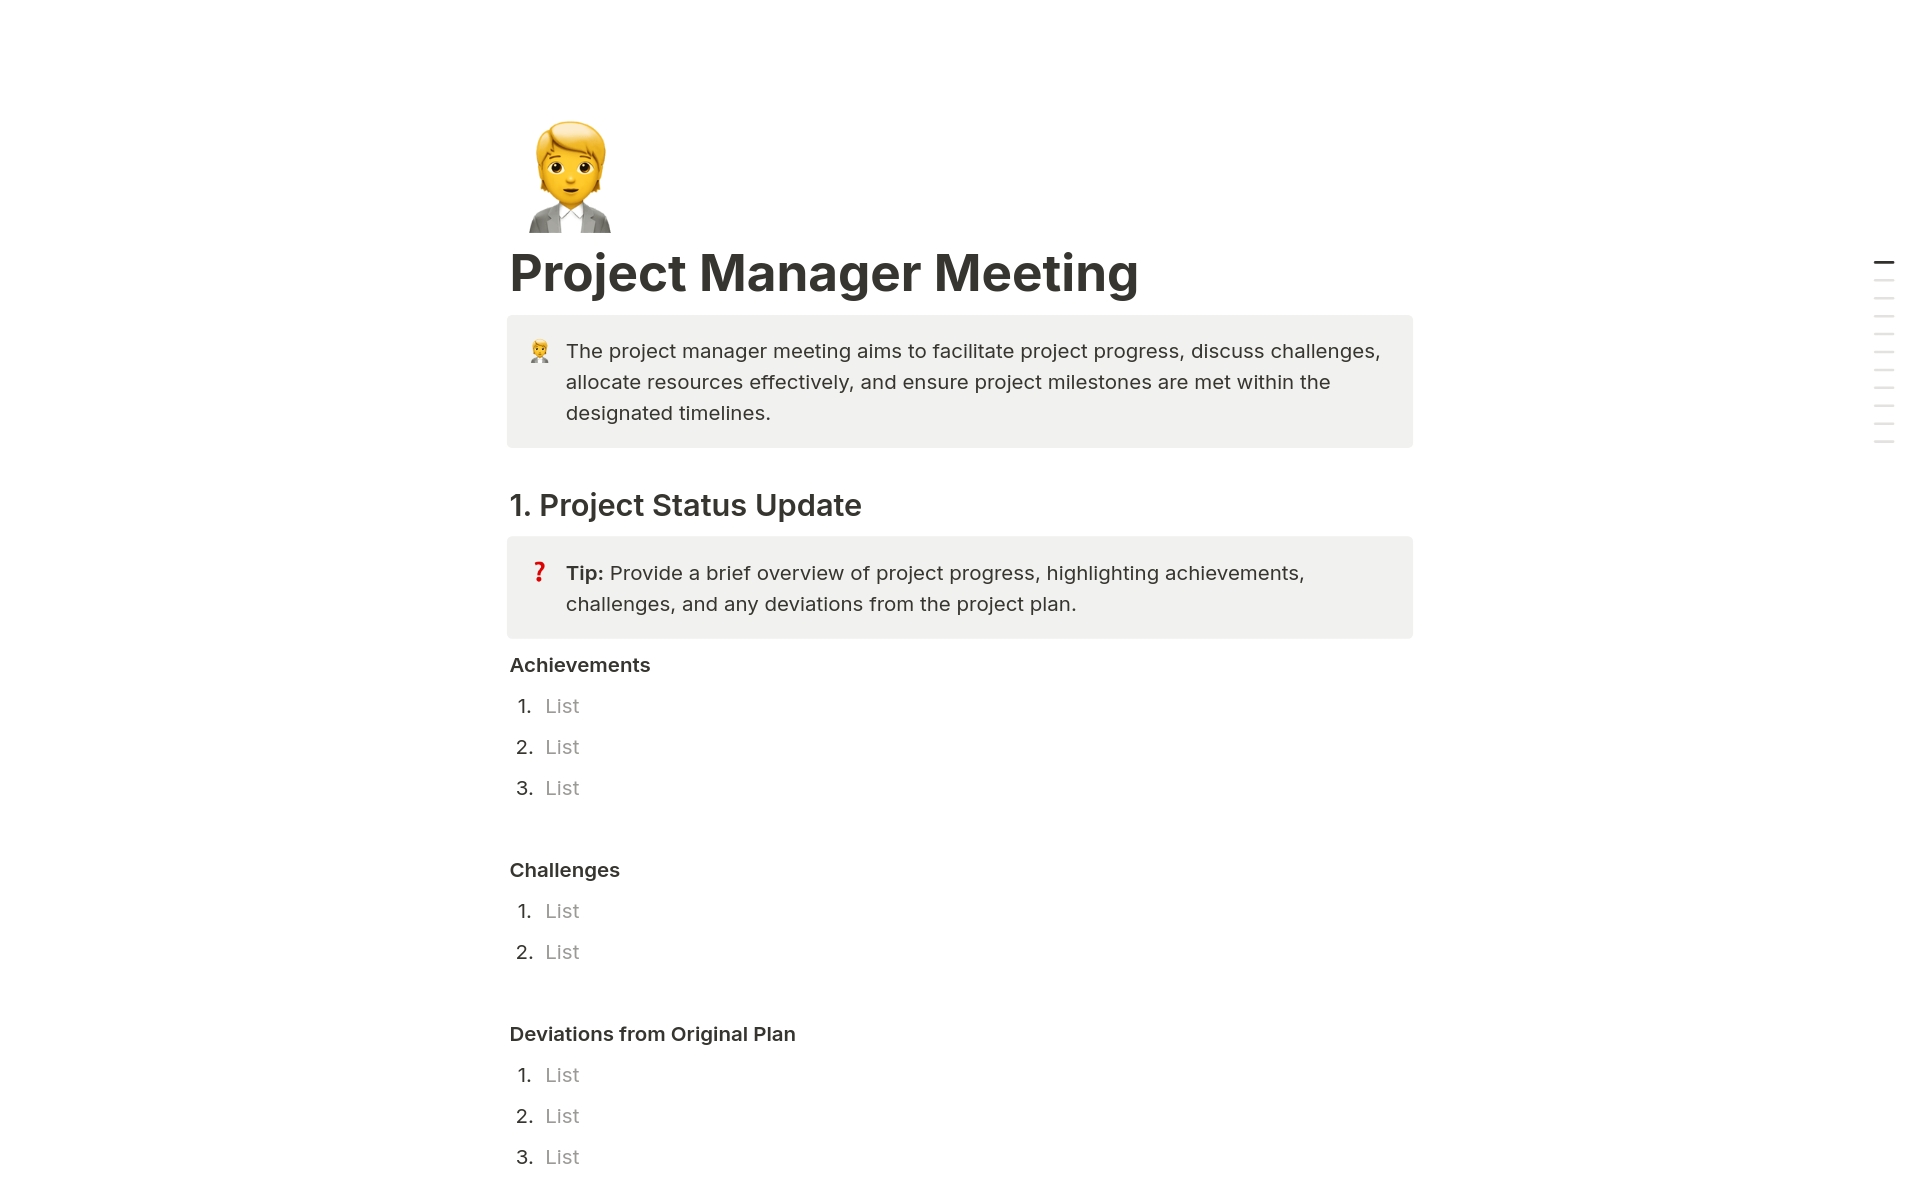 The project manager meeting aims to facilitate project progress, discuss challenges, allocate resources effectively, and ensure project milestones are met within the designated timelines.